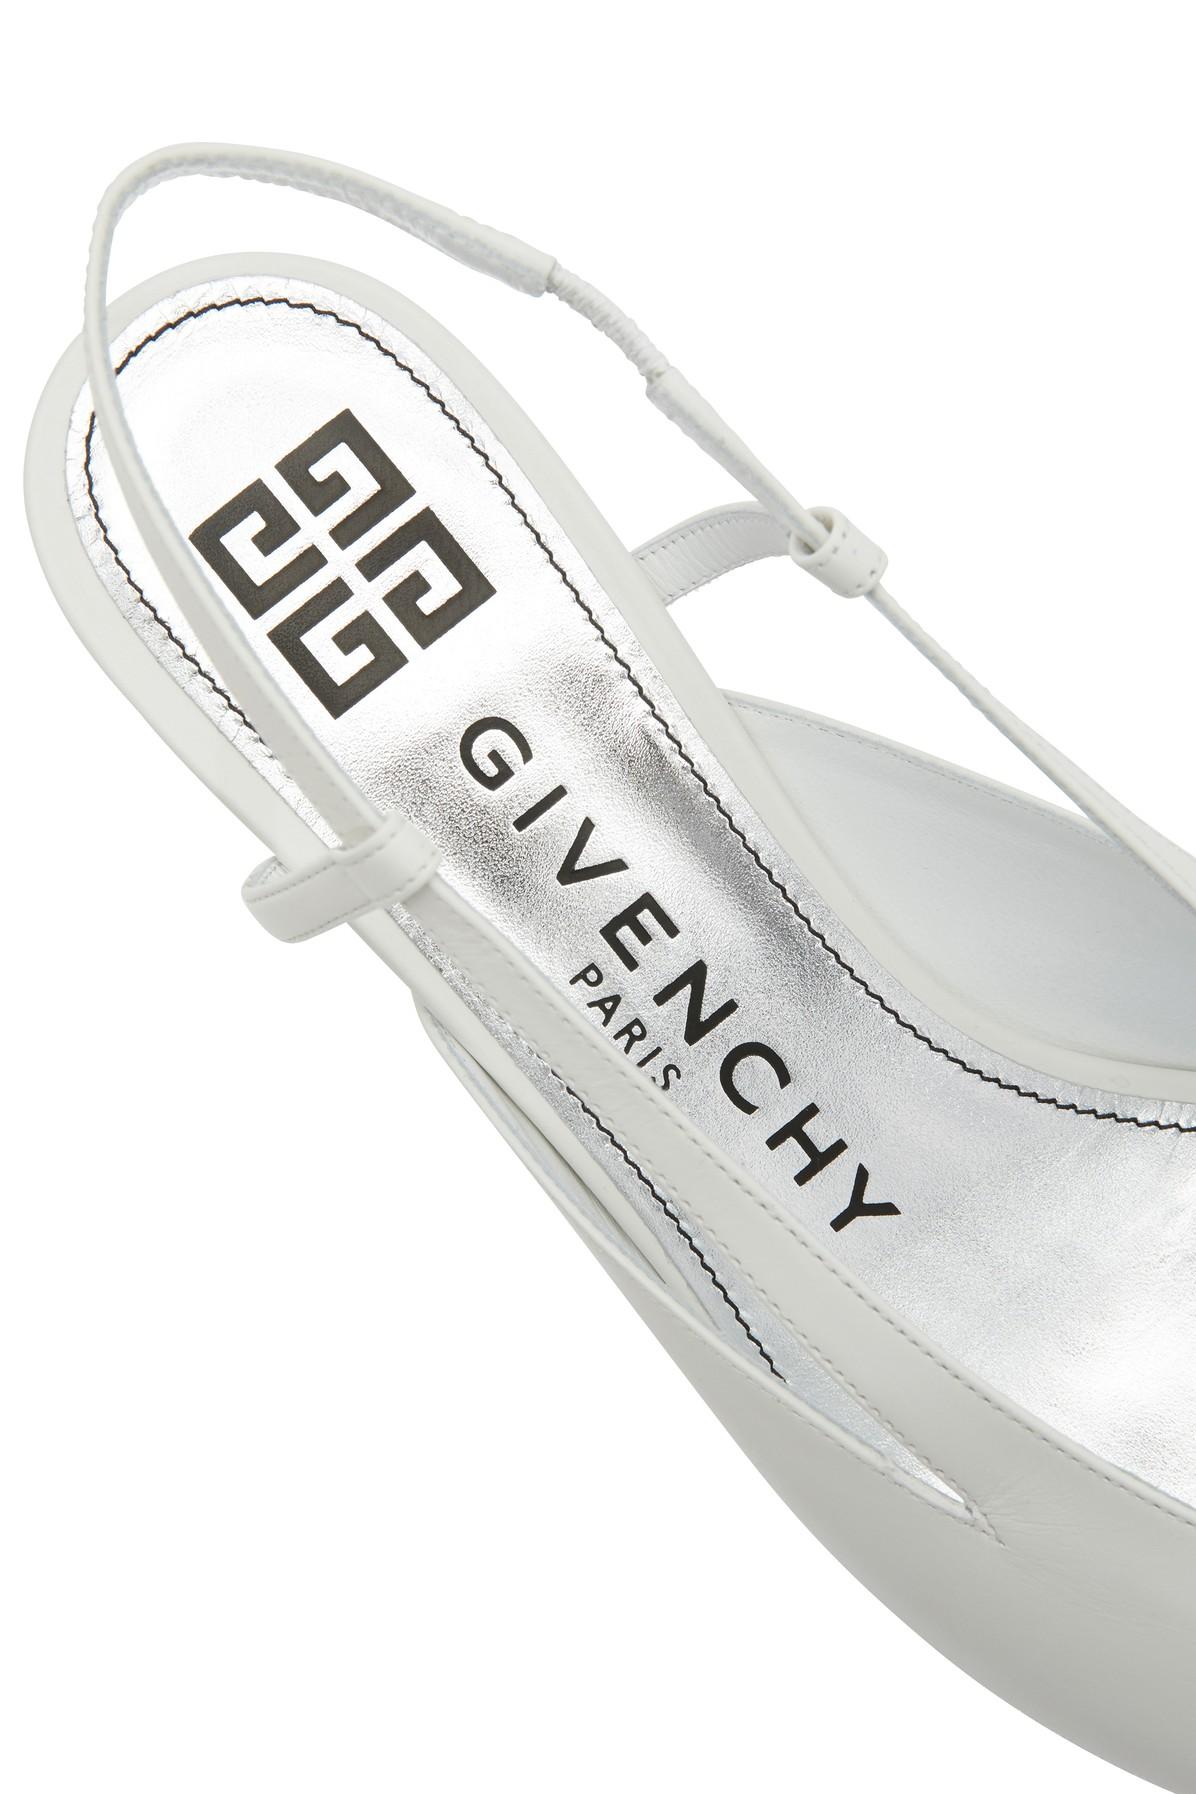 Givenchy Specchio Leather Slingback Pumps in White - Save 50% - Lyst